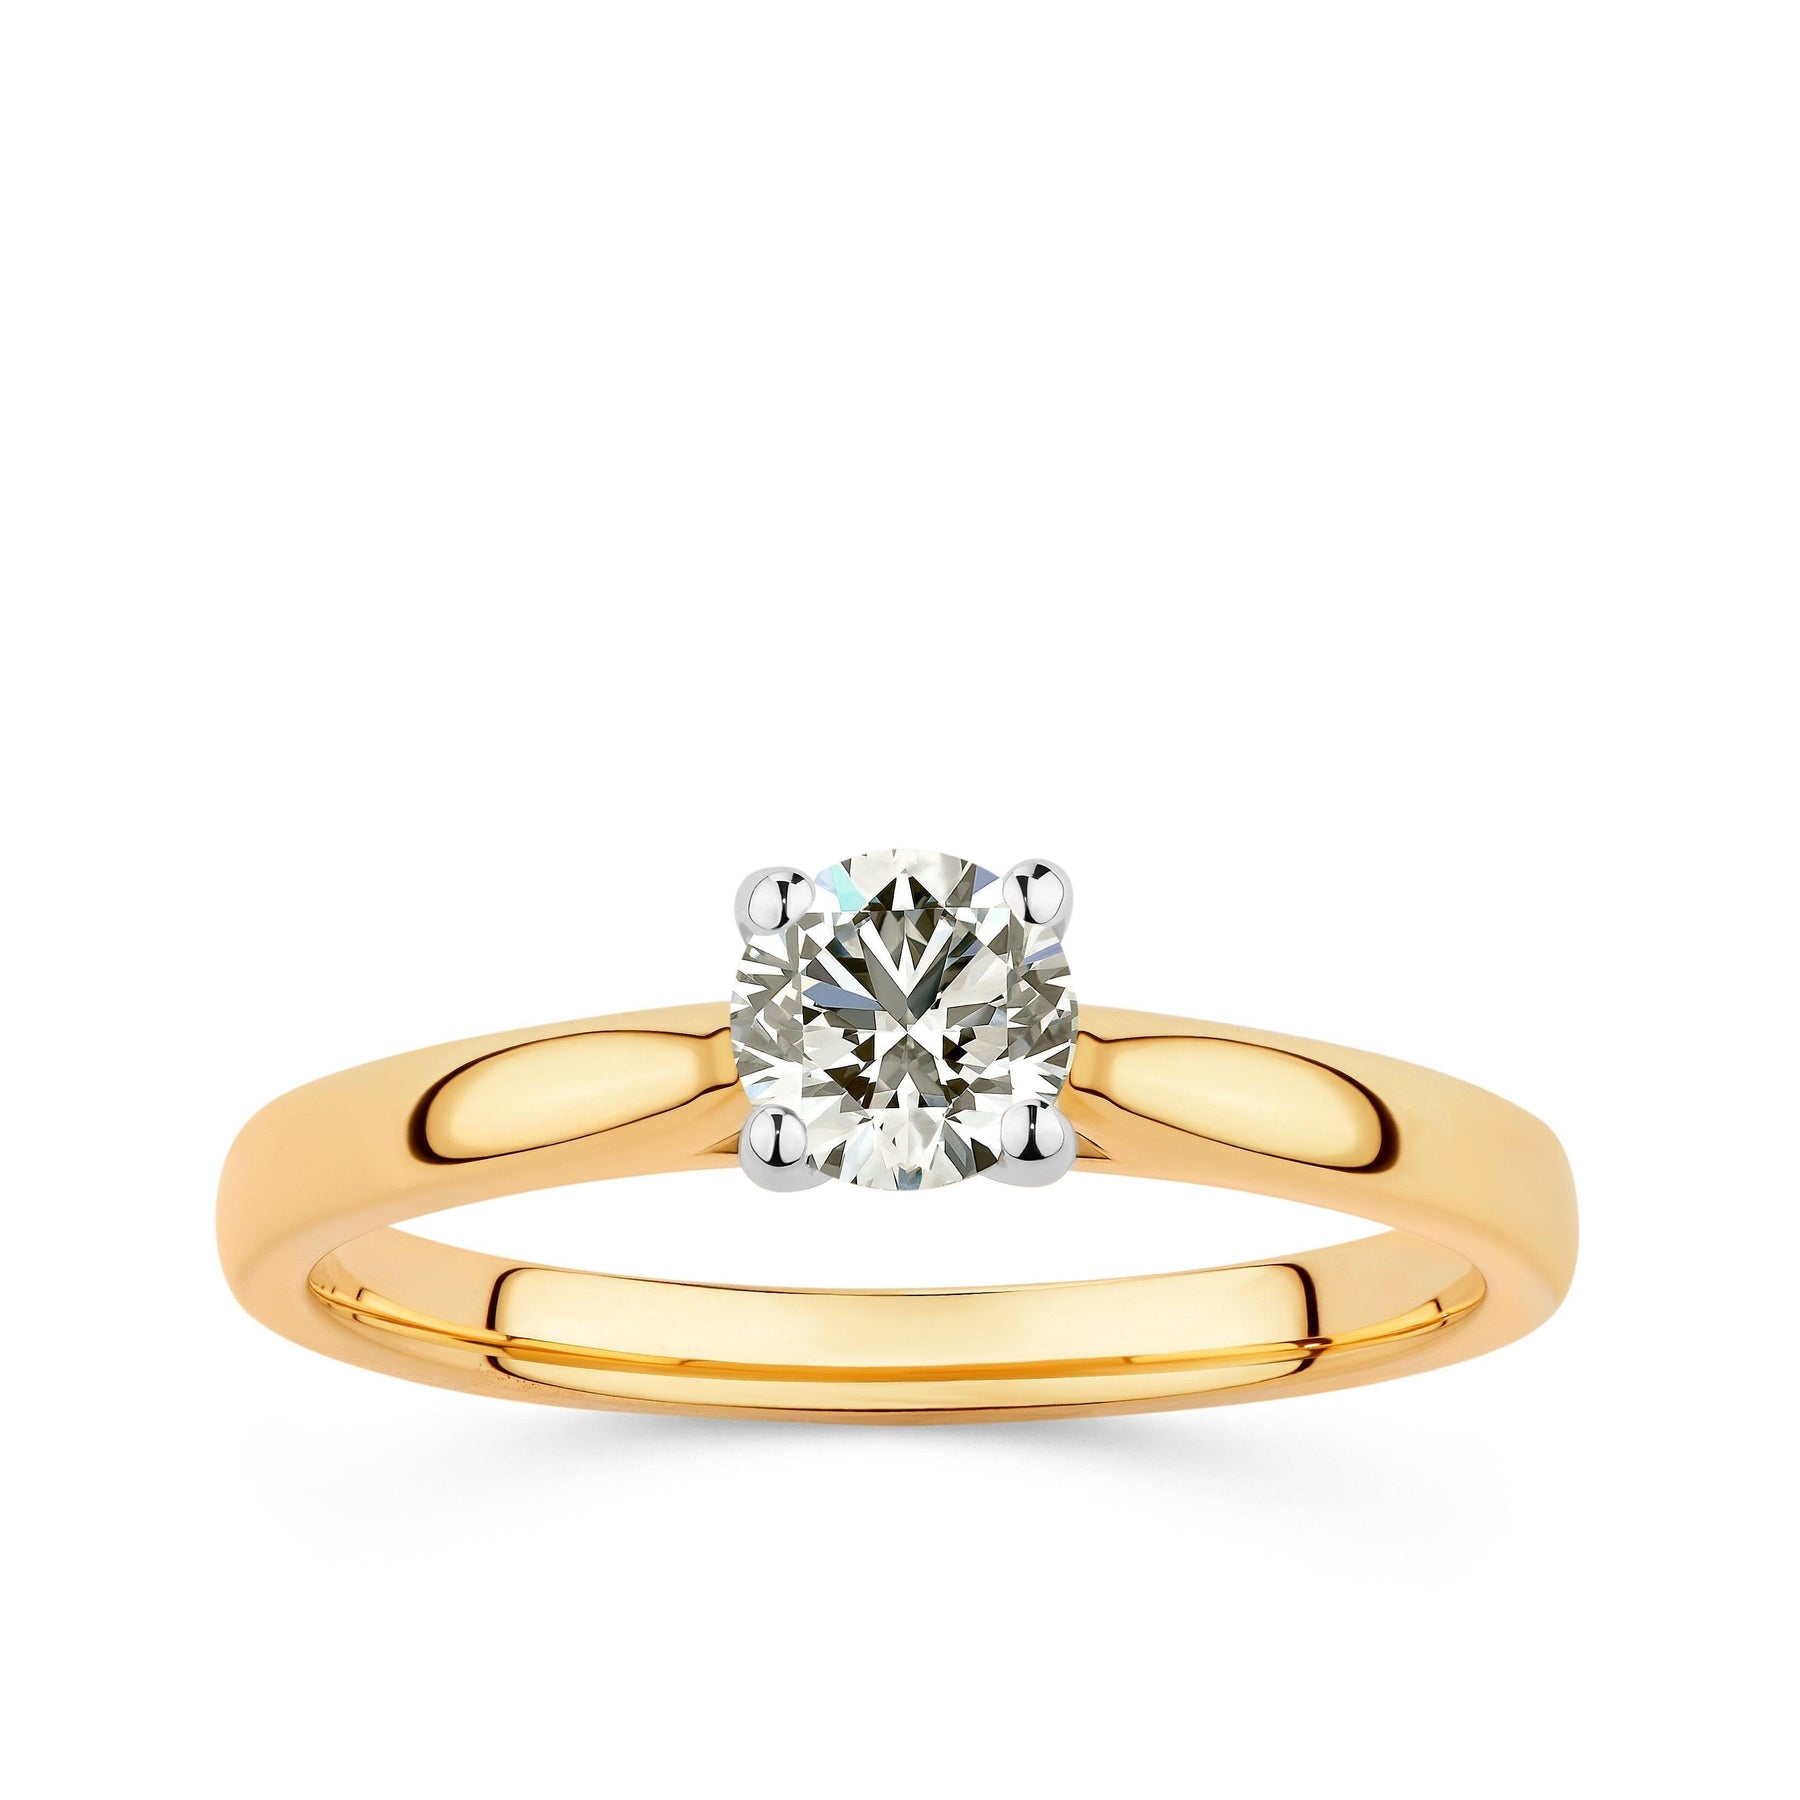 Rendition 0.50ct TW Diamond Solitaire Ring in 9ct Yellow & White Gold - Wallace Bishop